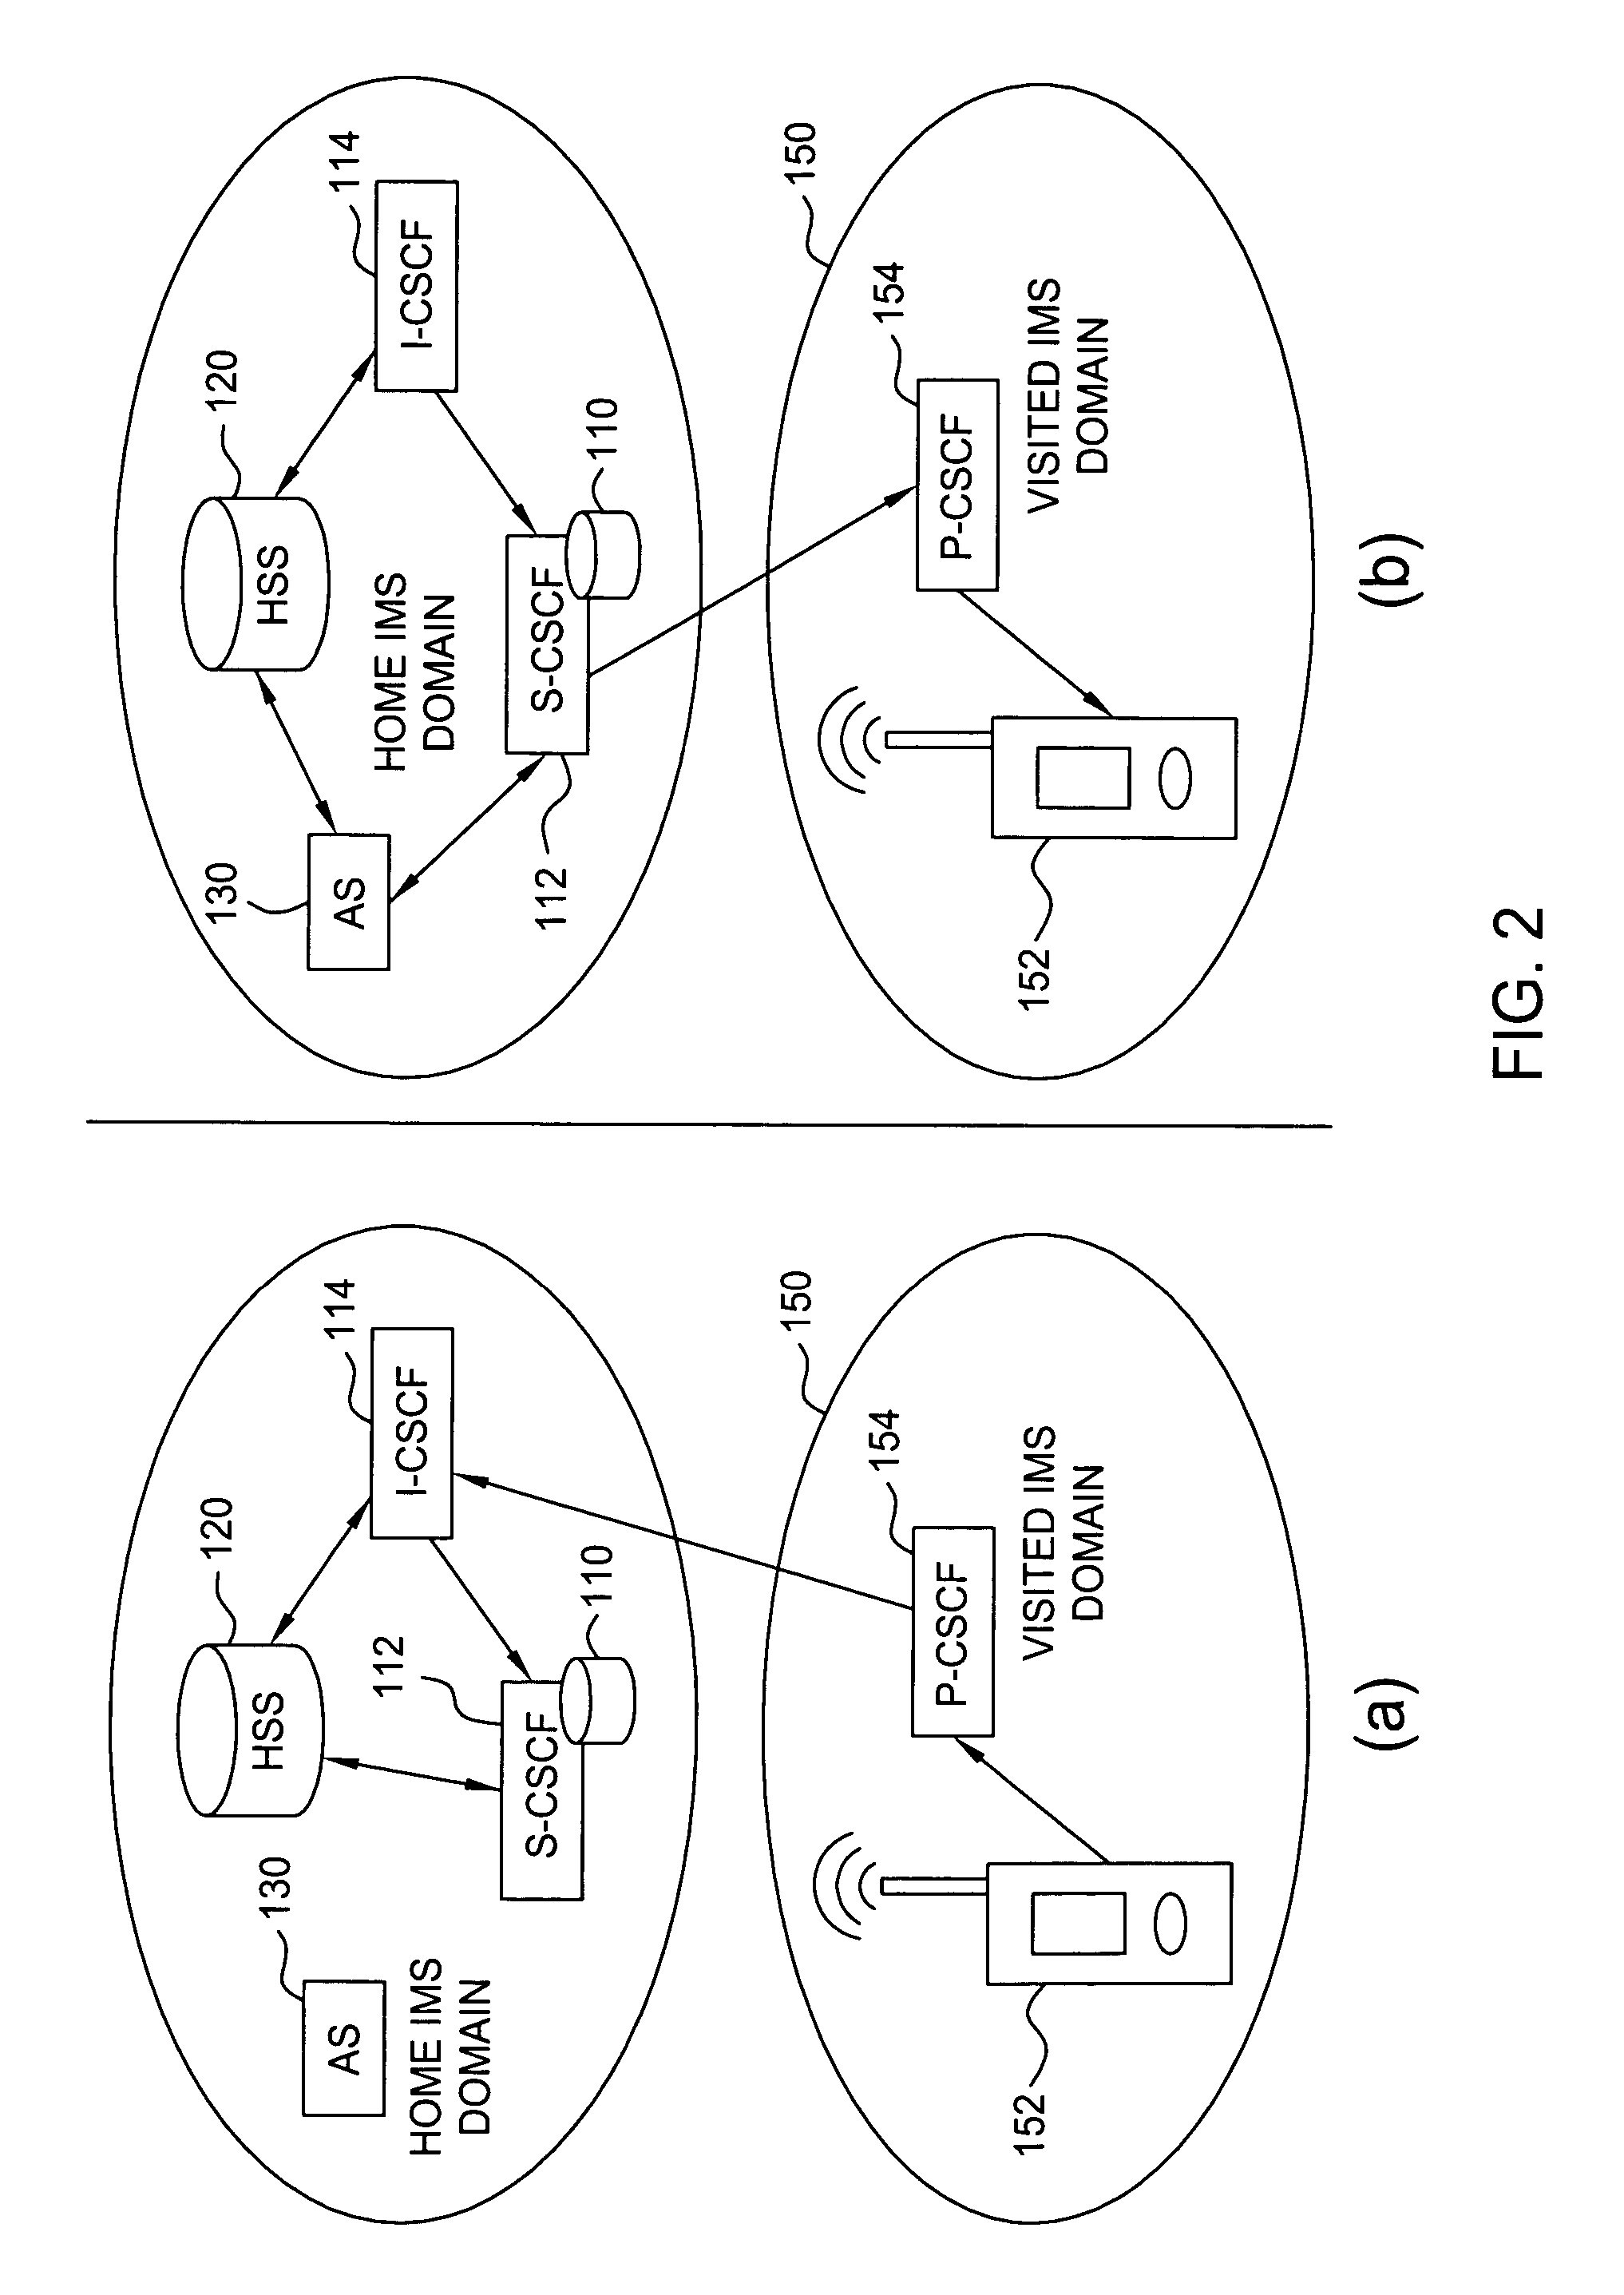 Method for deploying, provisioning and storing initial filter criteria